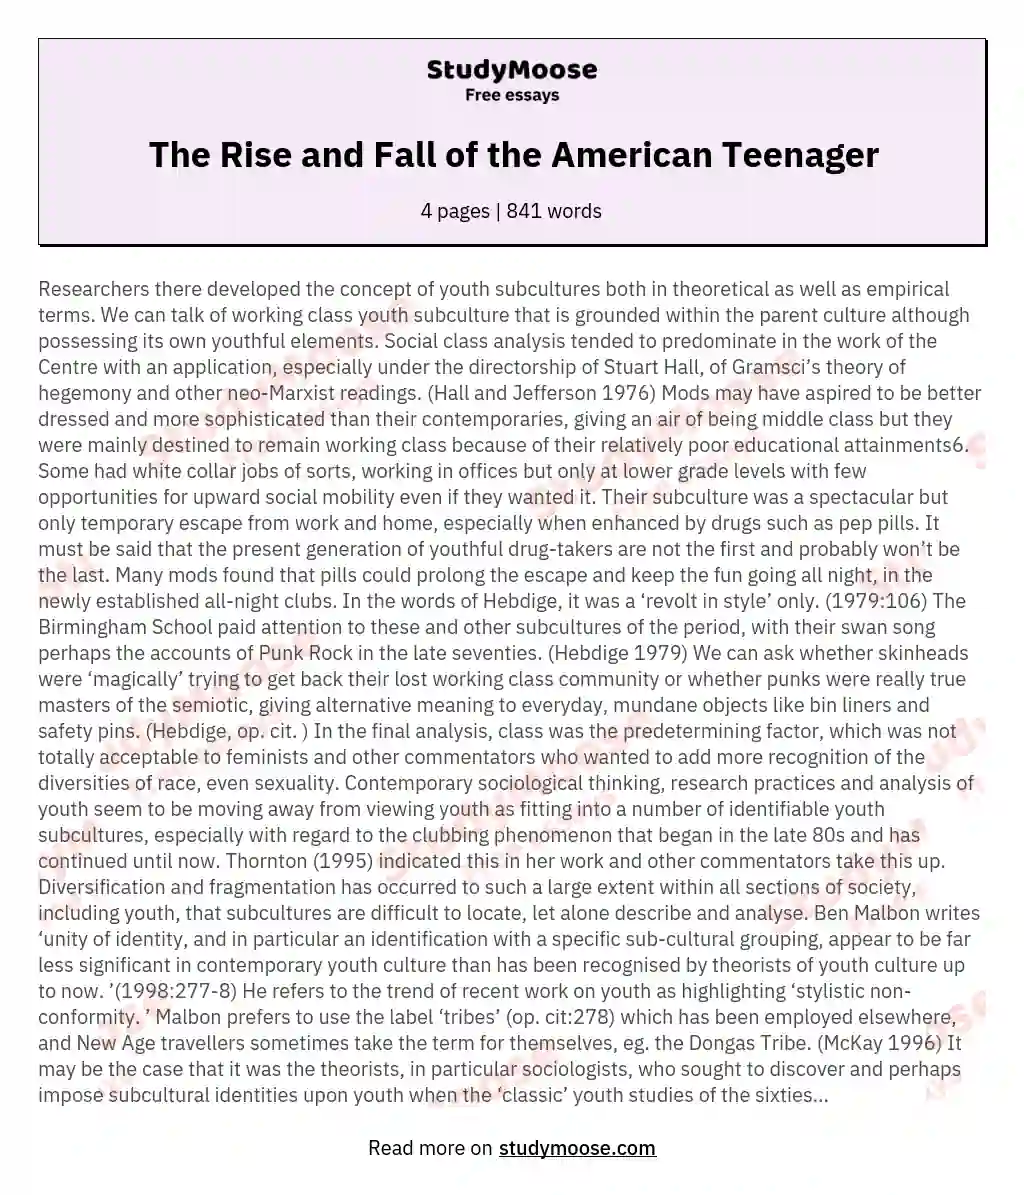 The Rise and Fall of the American Teenager essay